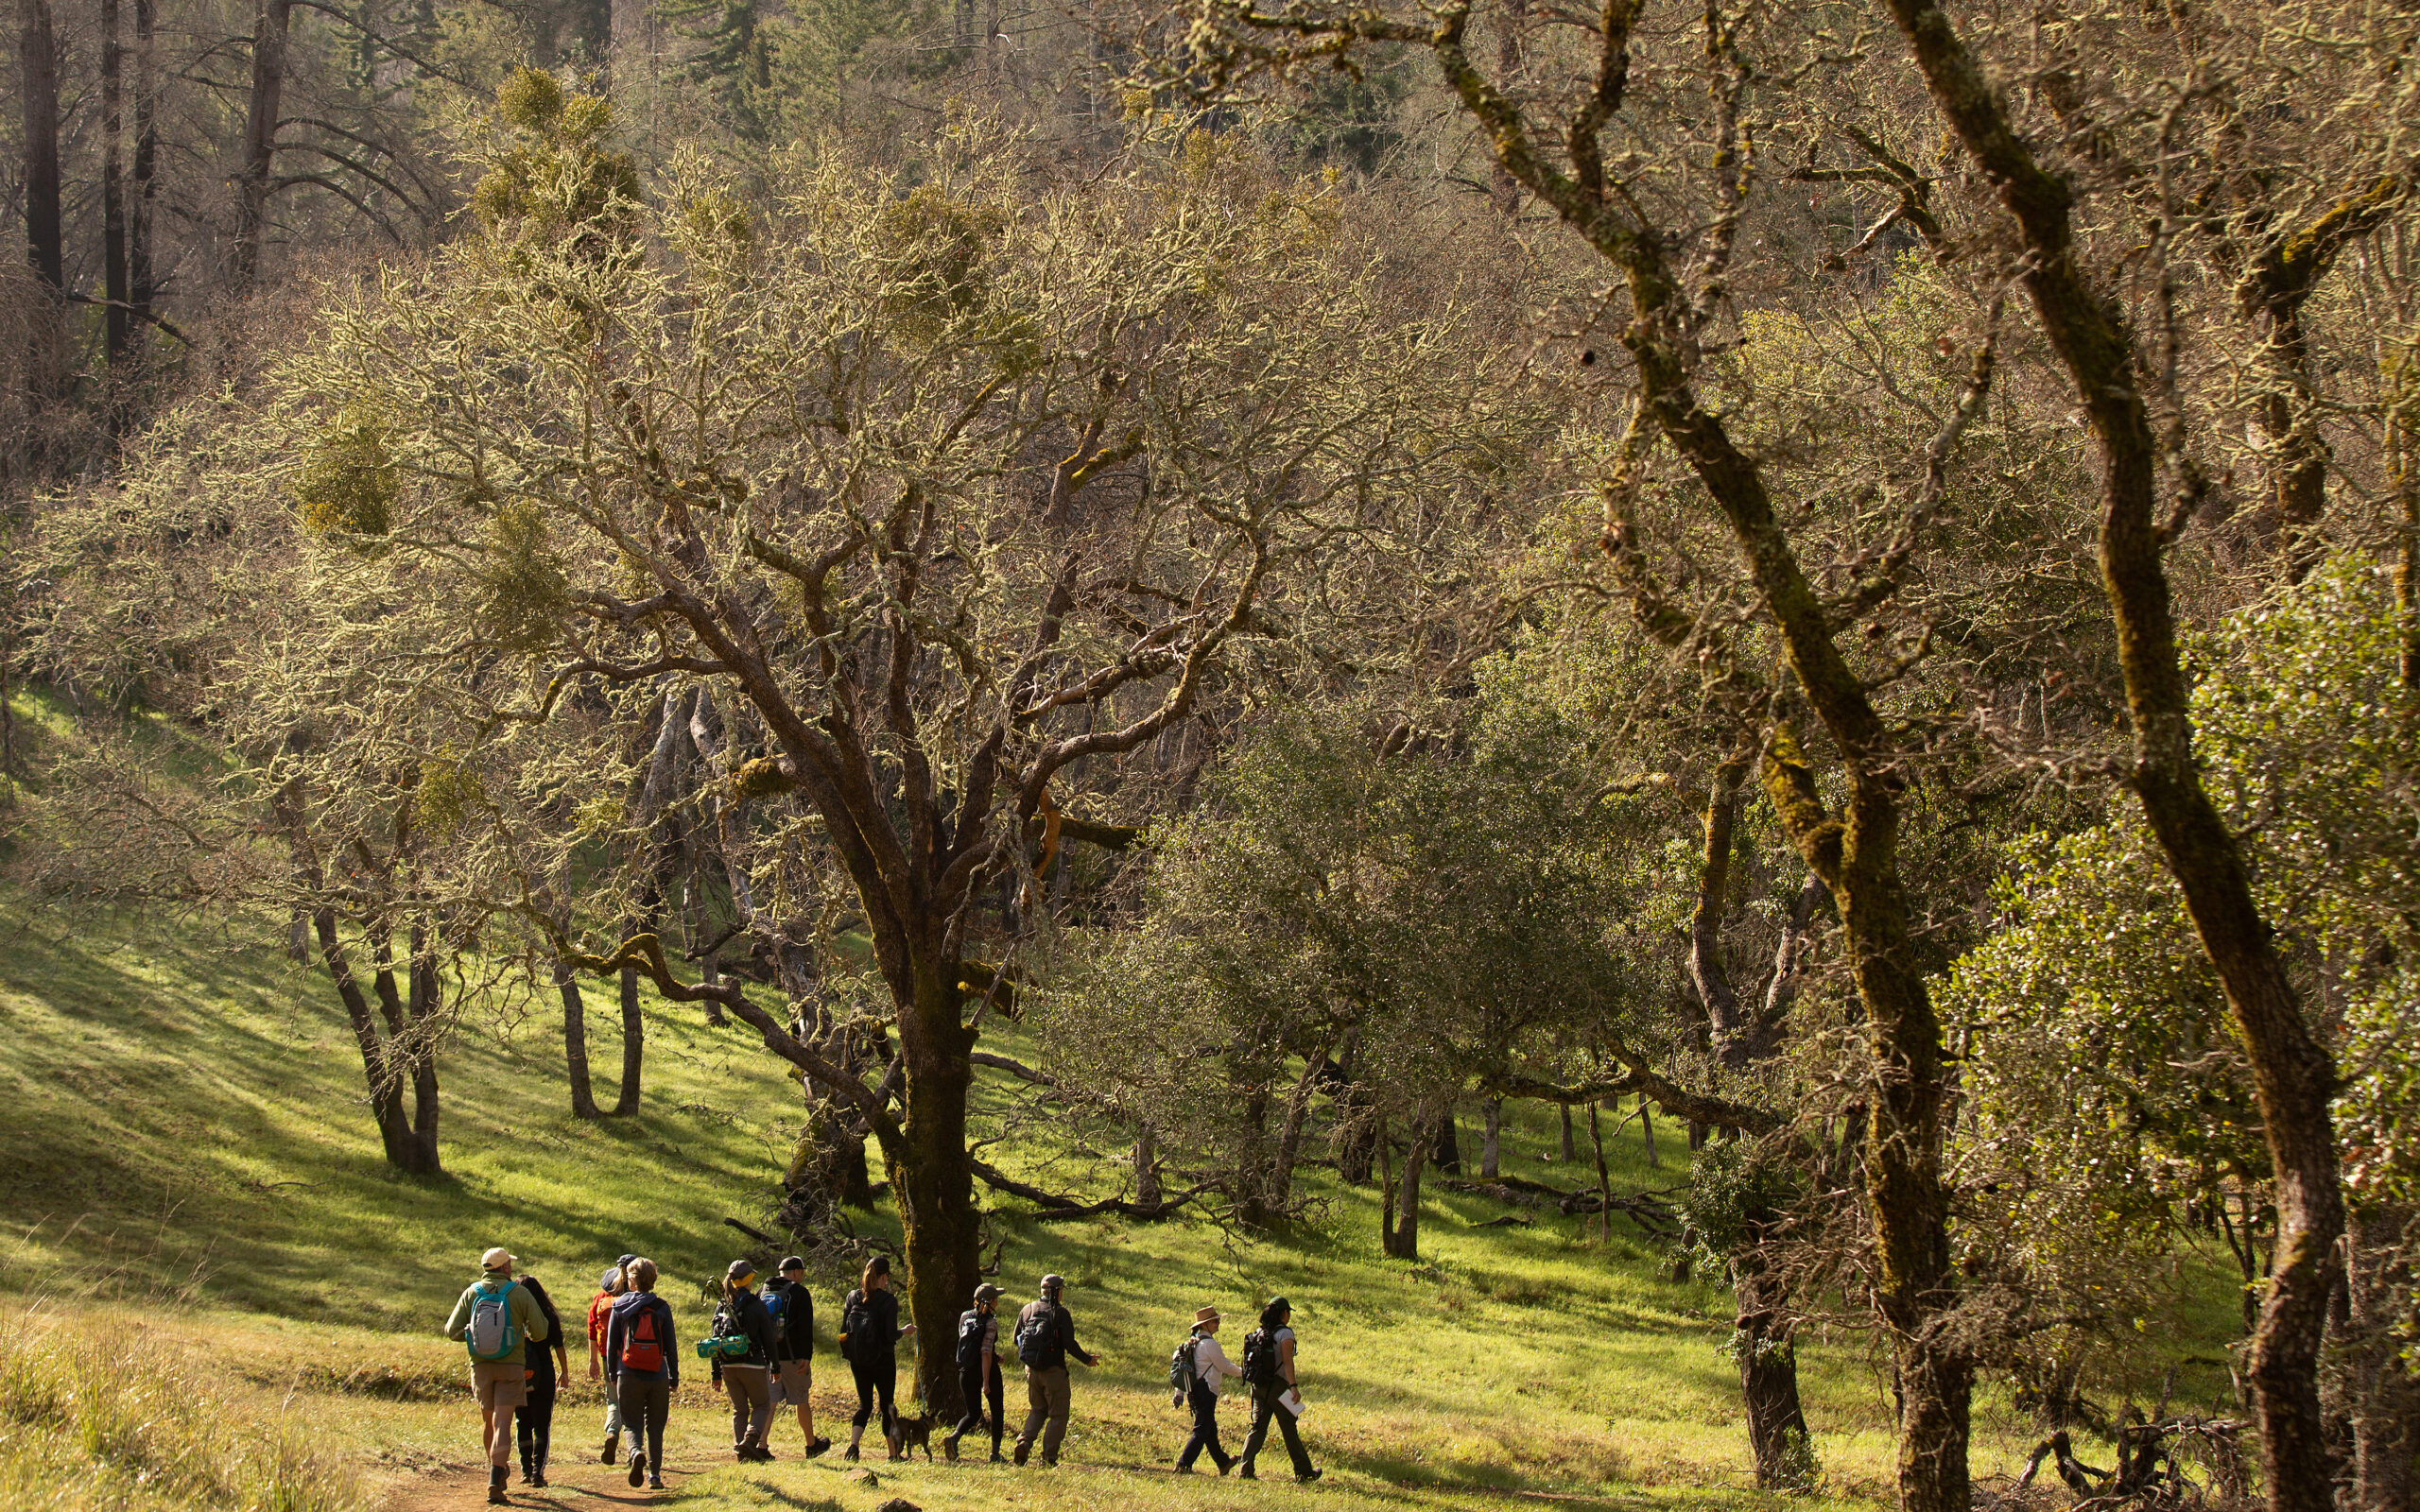 A group of hikers walk along a trail lined with oak trees at the Mark West Creek Regional Park & Open Space Preserve.